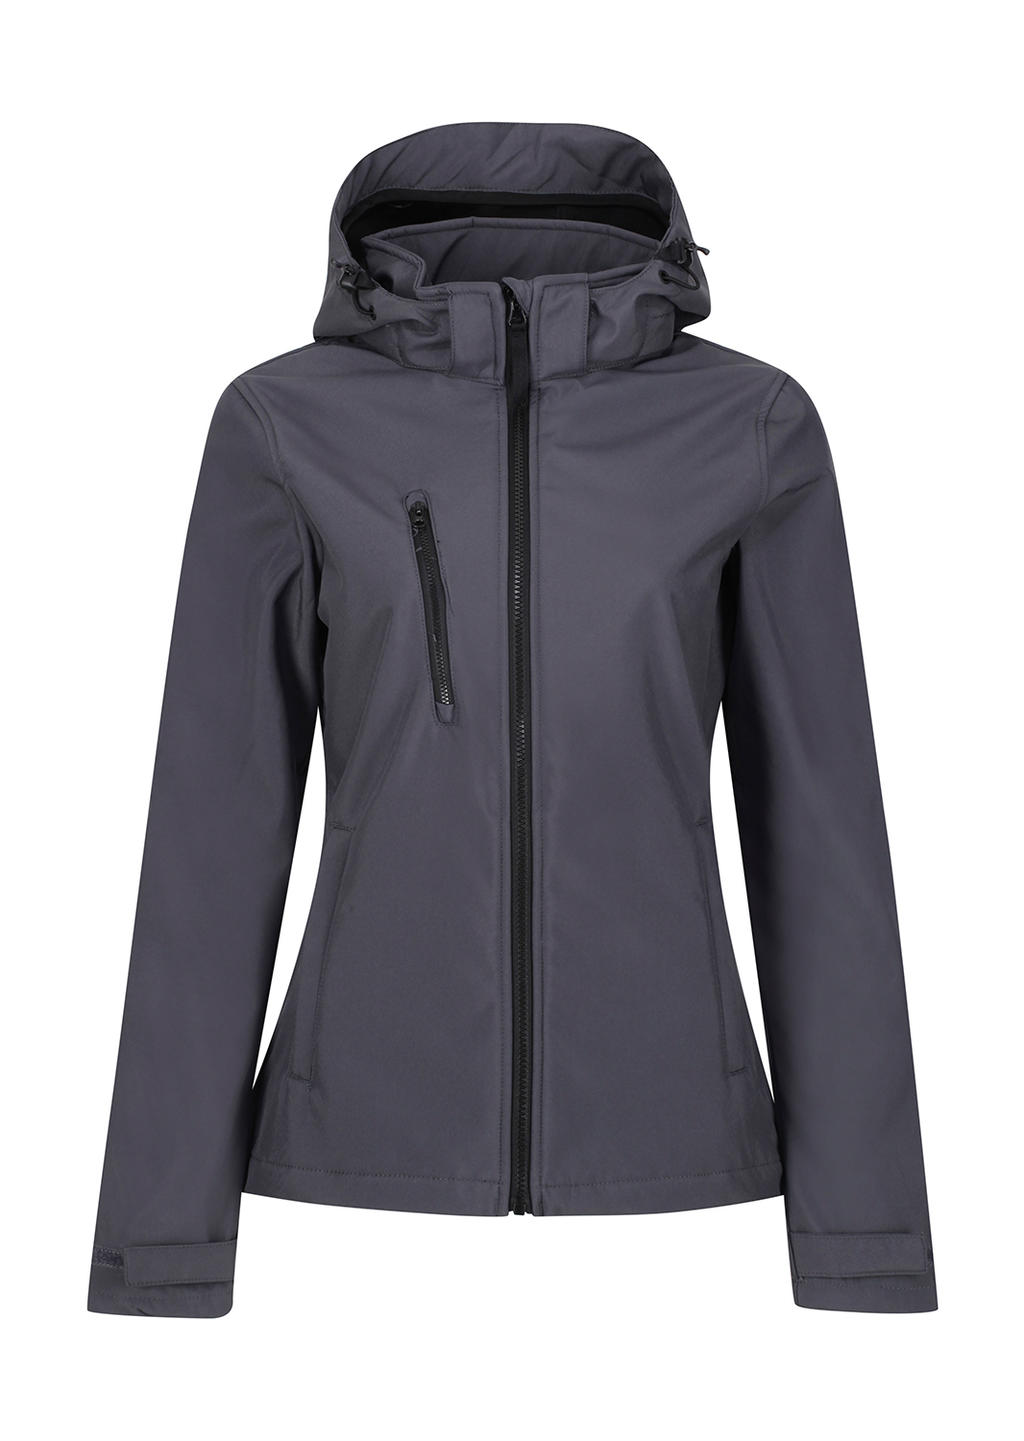  Womens Venturer 3-Layer Hooded Softshell Jacket in Farbe Seal Grey/Black